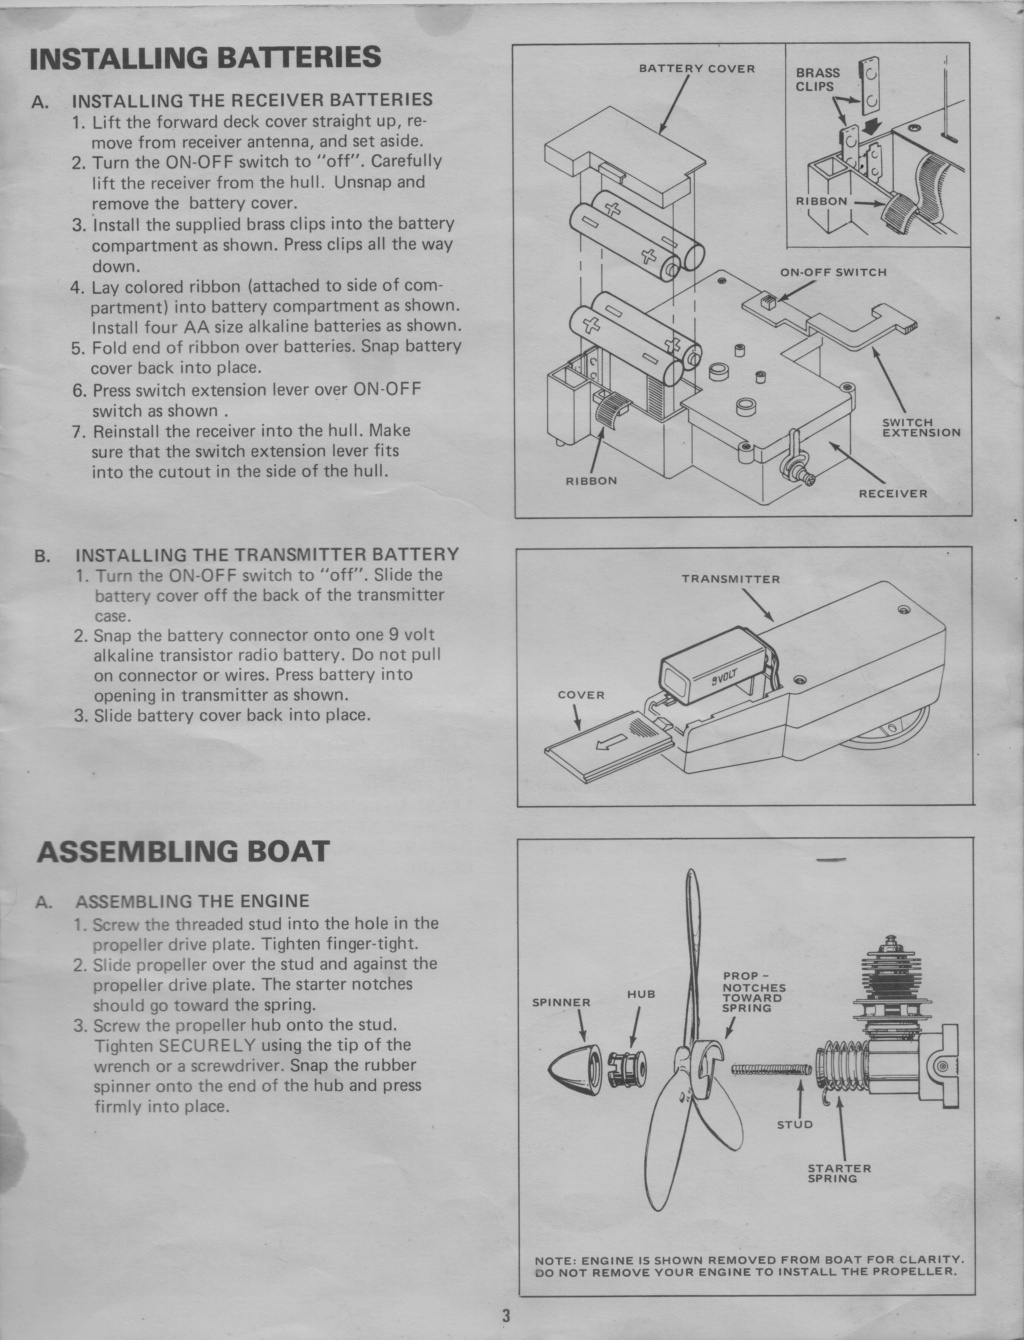 Hydro Blaster pictures and manual scans . Hydro_11